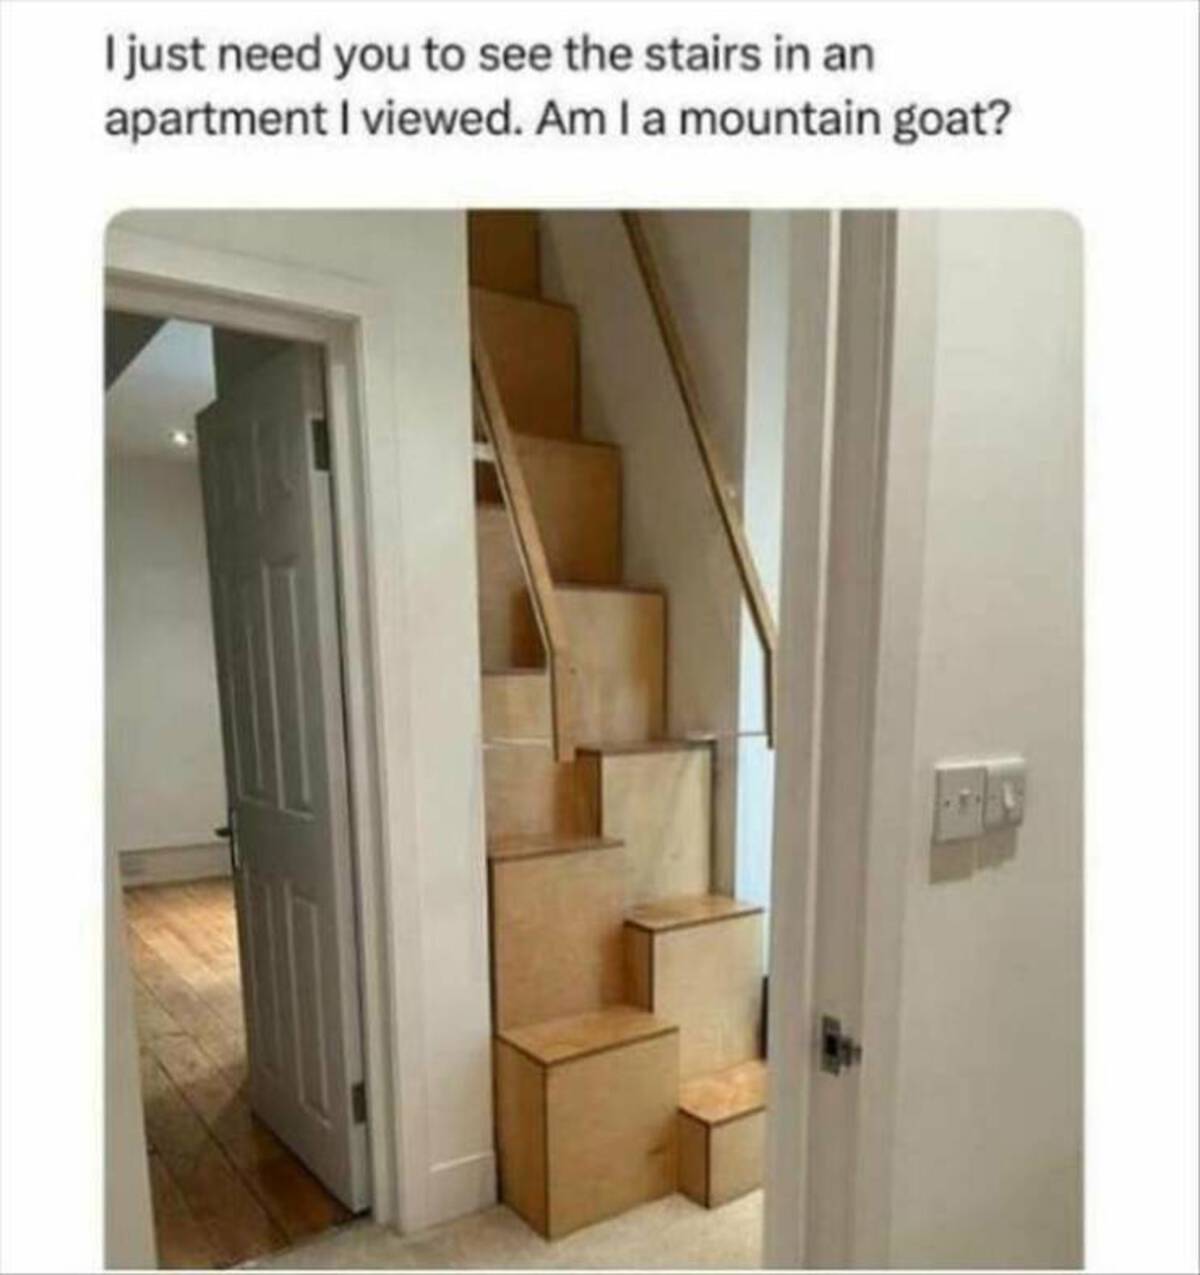 I just need you to see the stairs in an apartment I viewed. Am I a mountain goat?